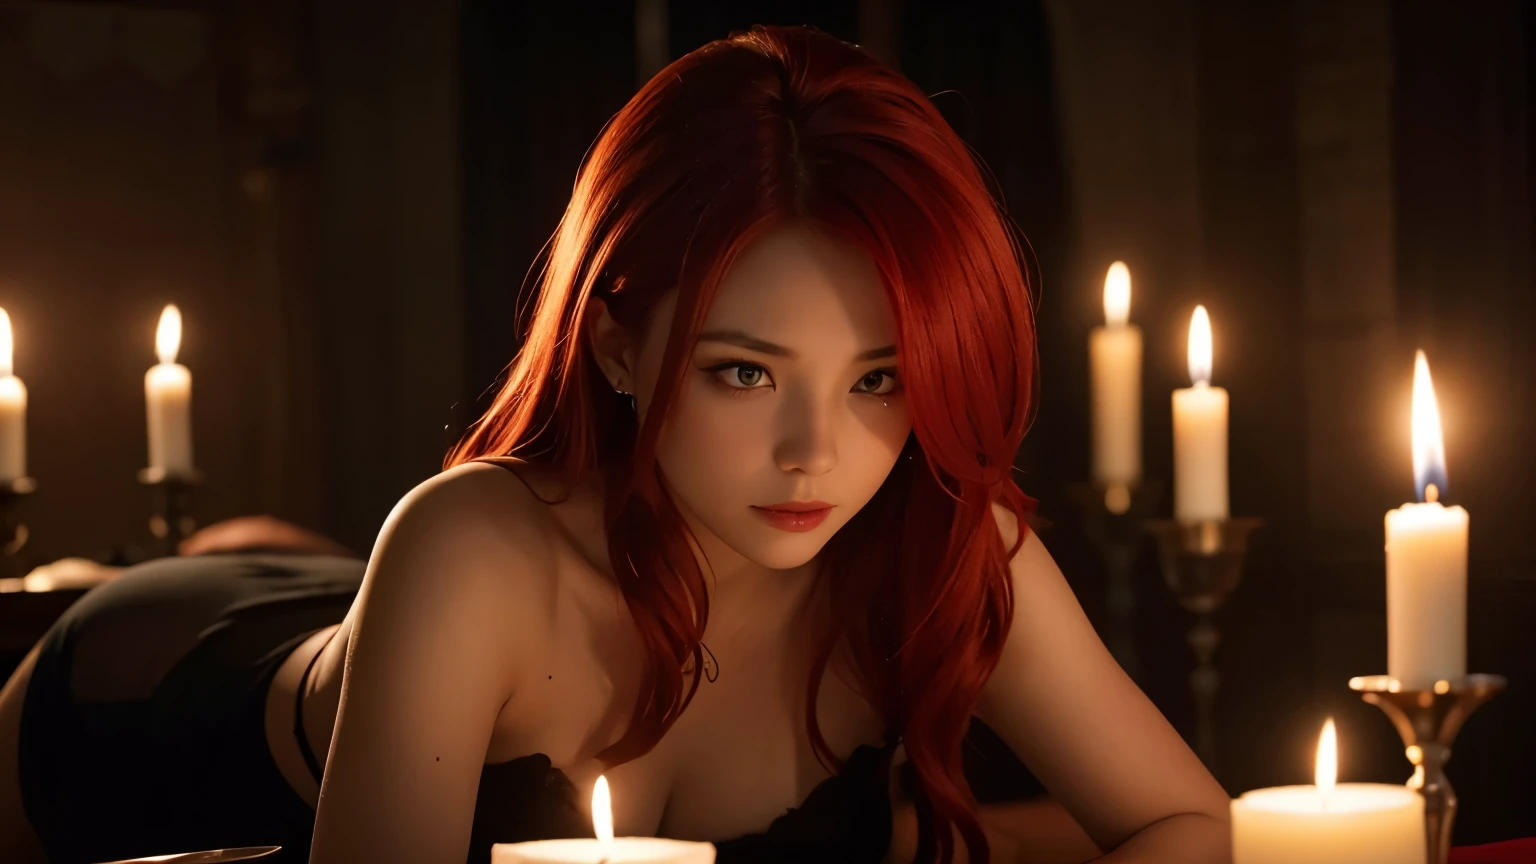 Red Hair, Sexy, Submission, Dark Romantic, Night, Dinner, Candles, High Details, Ultra HD, 4K